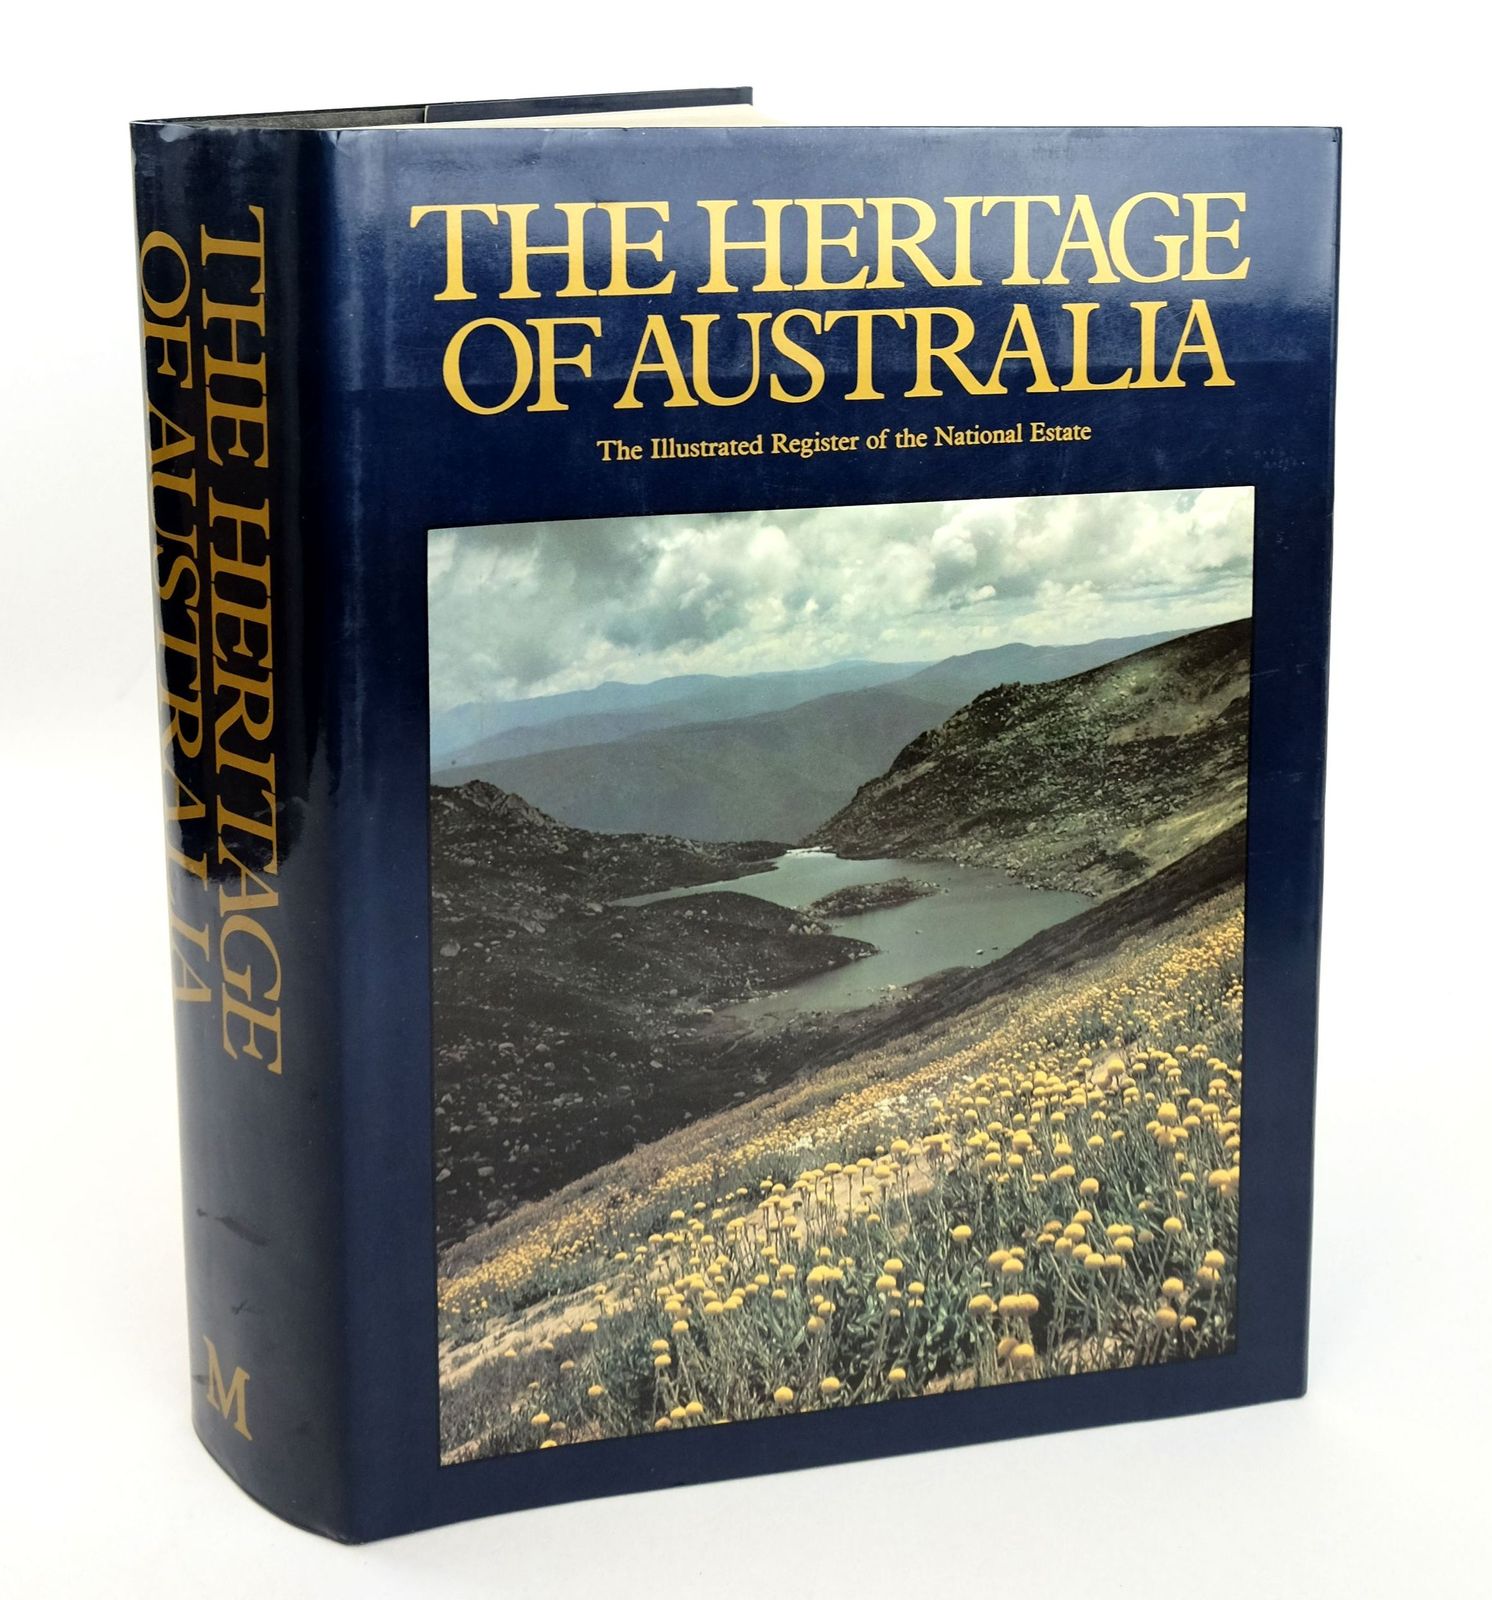 Photo of THE HERITAGE OF AUSTRALIA: THE ILLUSTRATED REGISTER OF THE NATIONAL ESTATE published by The Macmillan Company Of Australia (STOCK CODE: 1819029)  for sale by Stella & Rose's Books